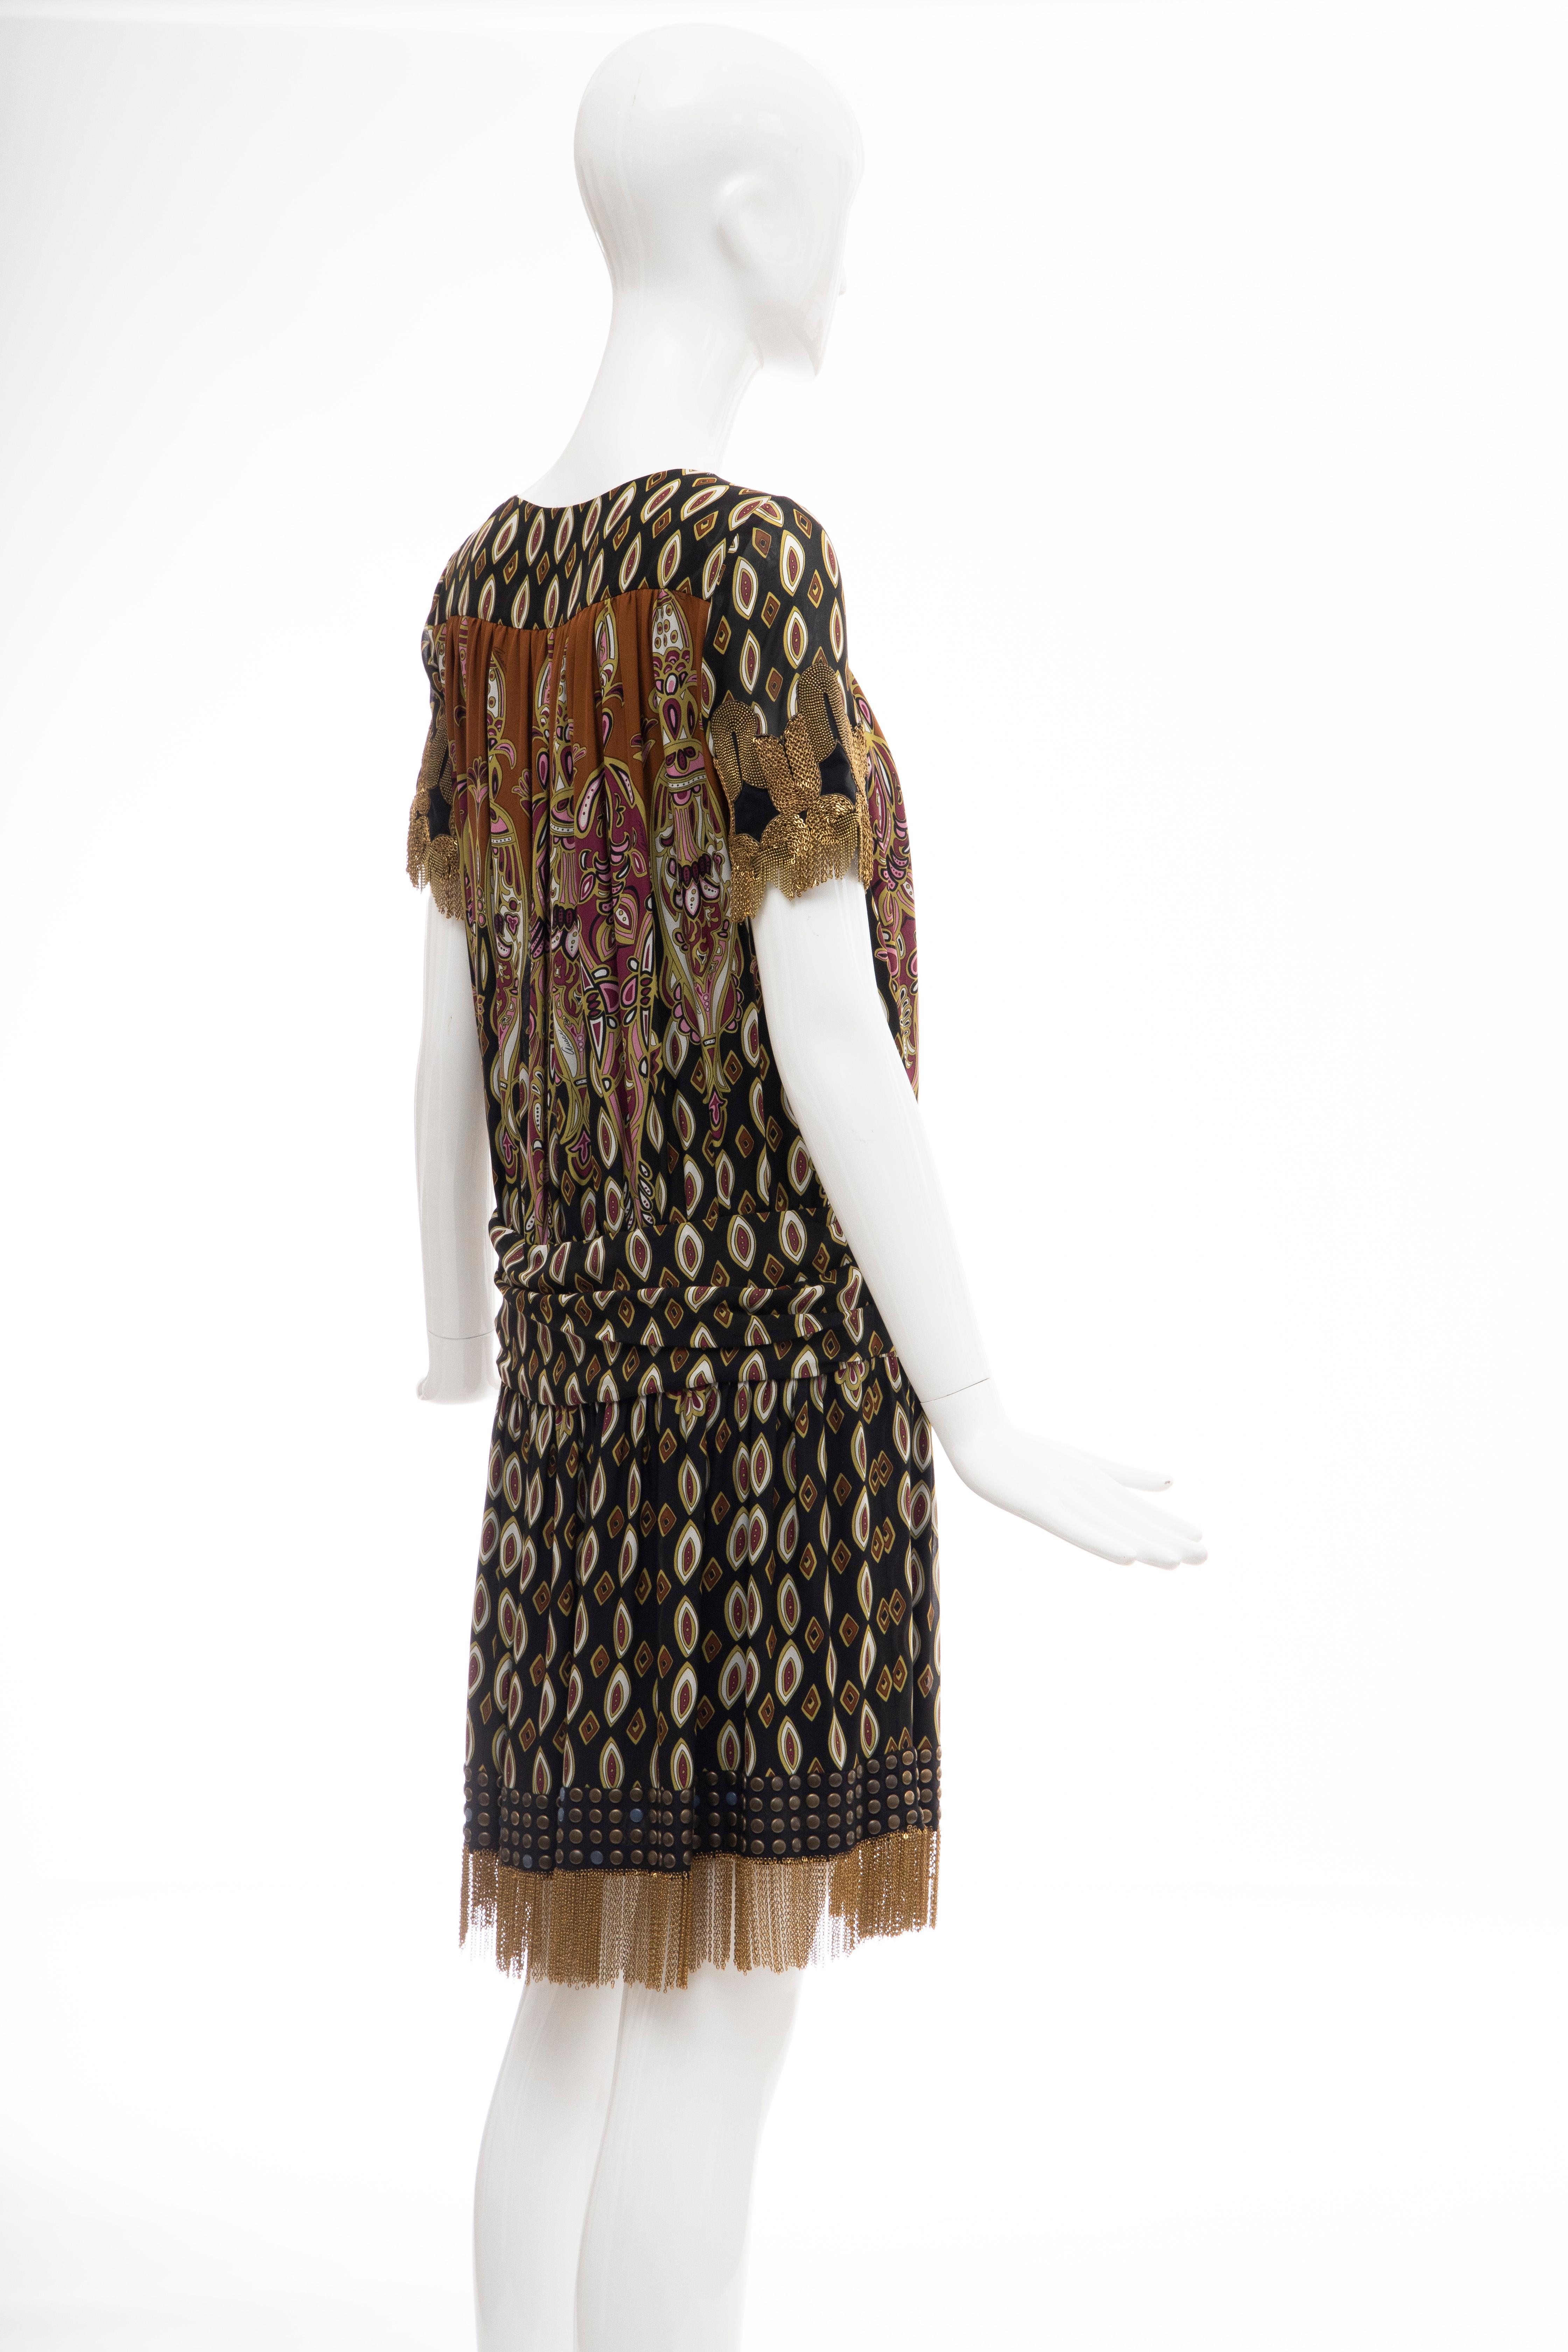 Frida Giannini for Gucci Runway Silk Boteh Pattern Brass Chains Dress, Fall 2008 For Sale 1